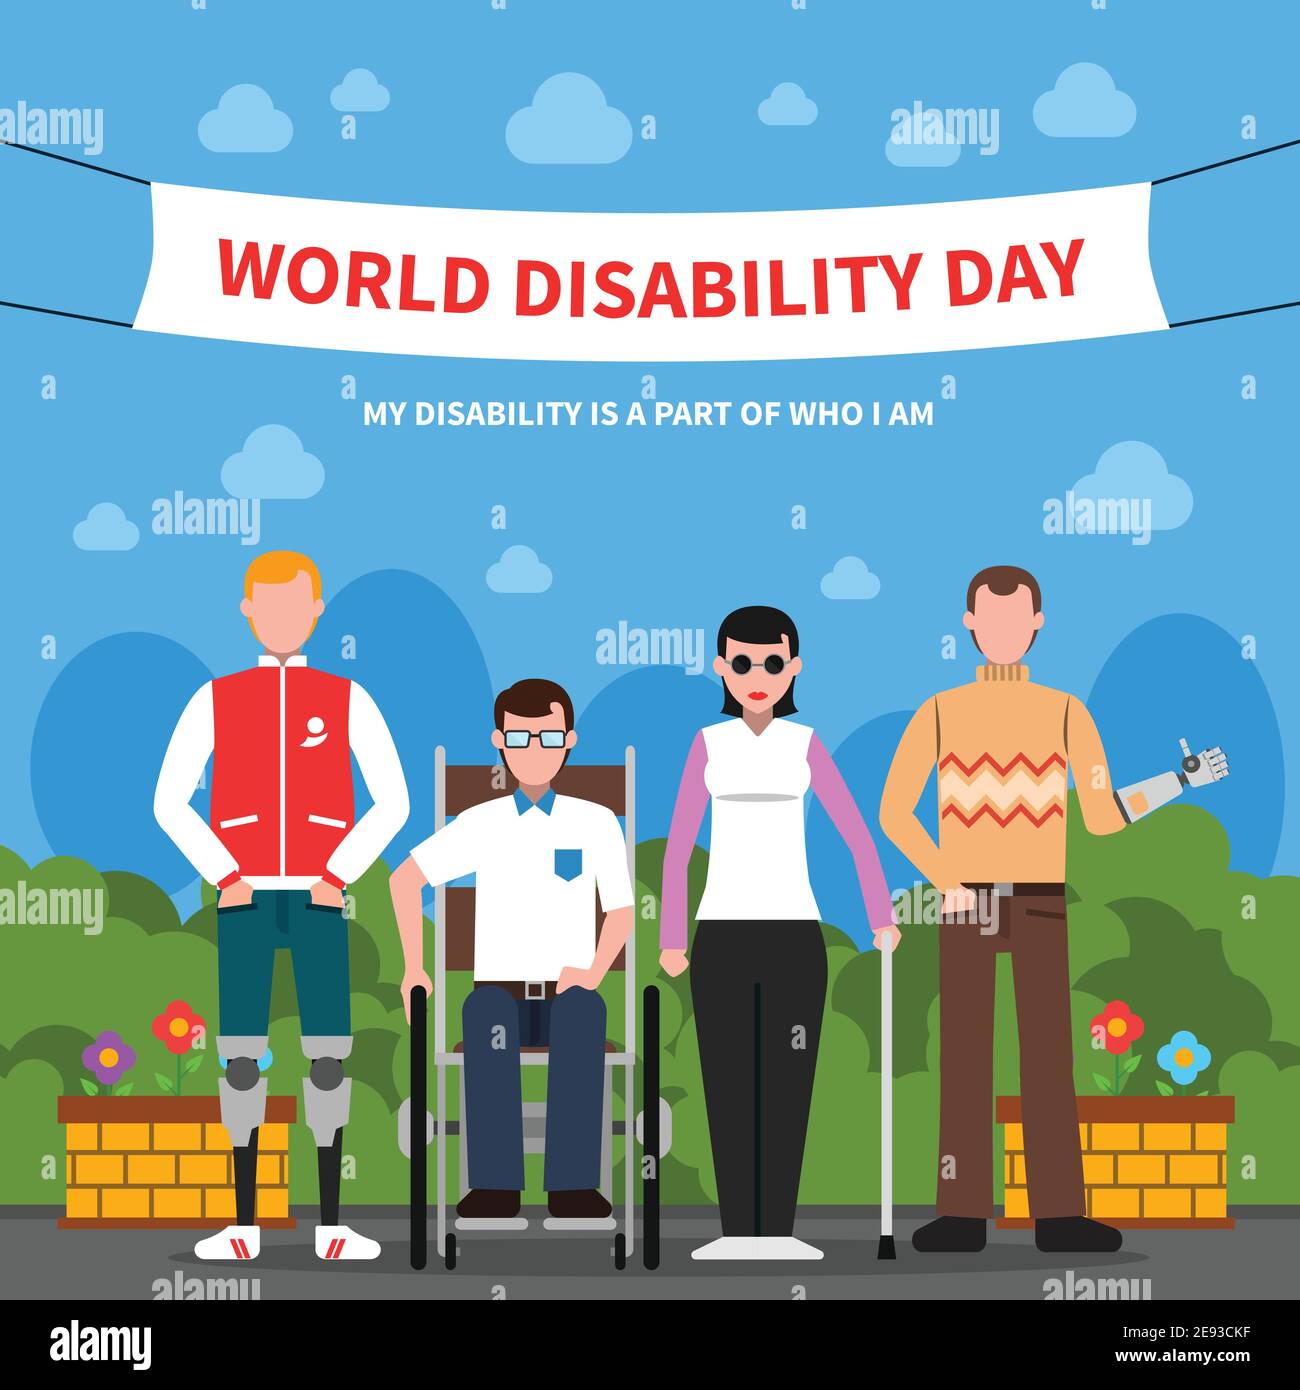 World disability day for solidarity and support flat poster design with handicapped people abstract vector illustration Stock Vector